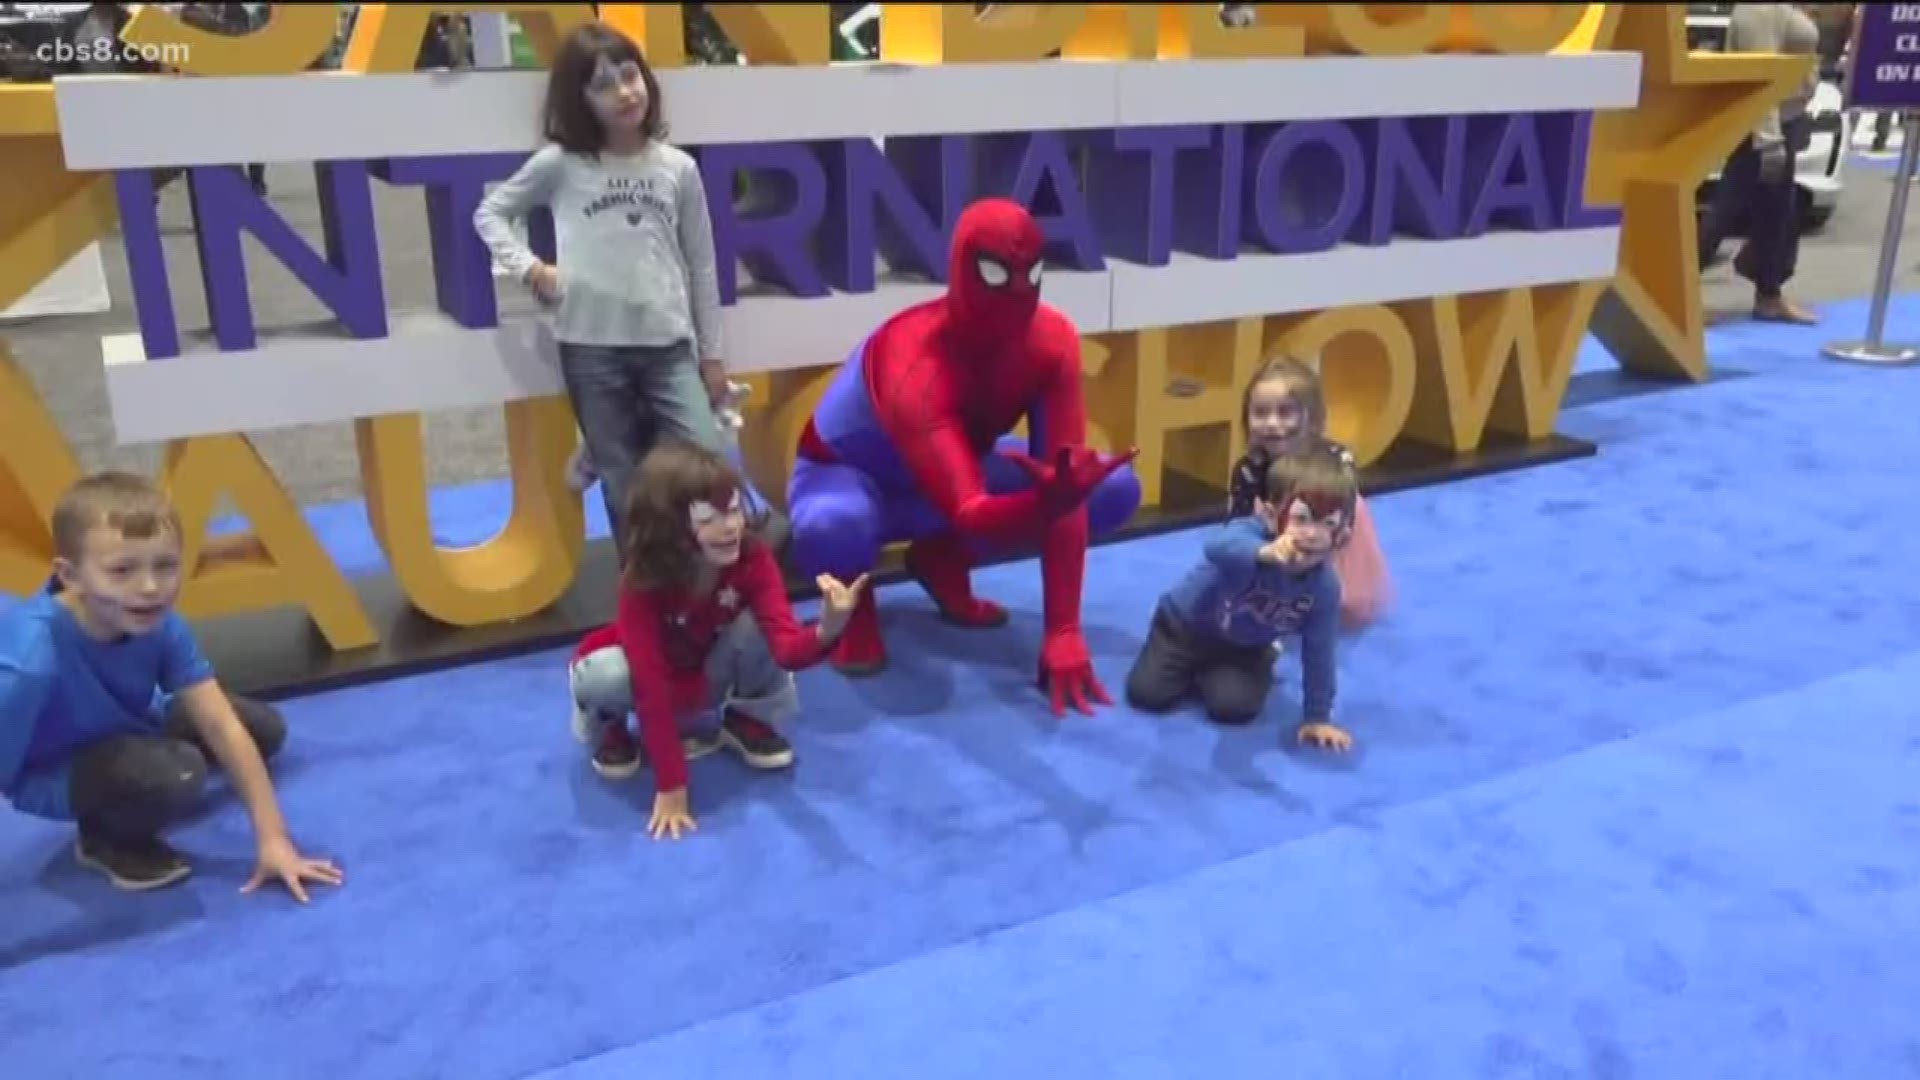 While the cars are the stars of the auto show, they took a backseat to a very popular superhero on Sunday.